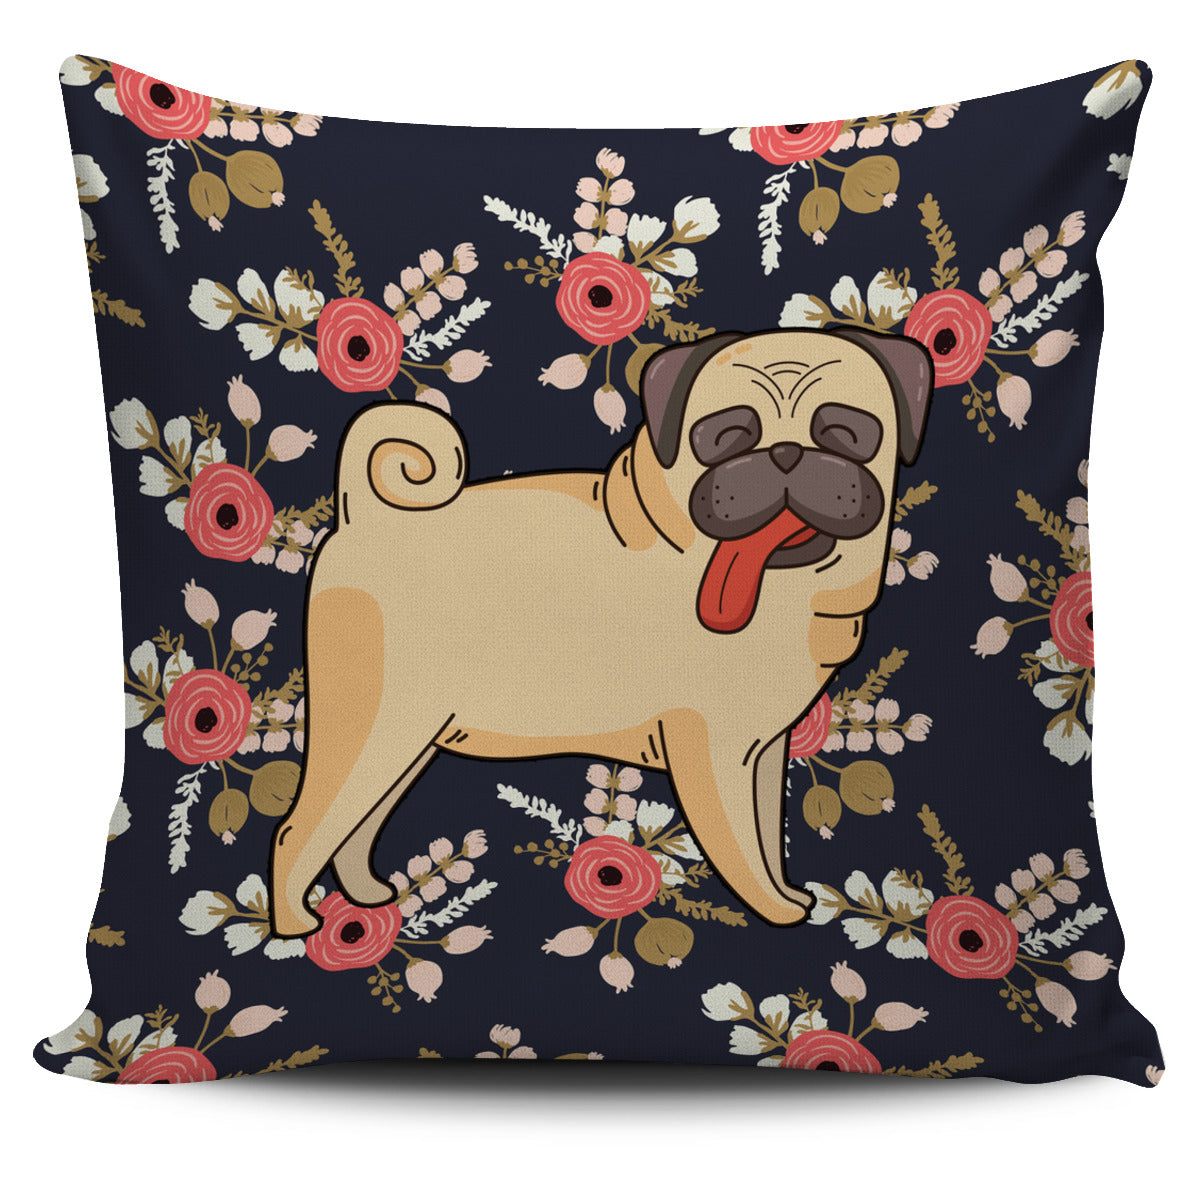 Silly Floral Pug Pillow Cover